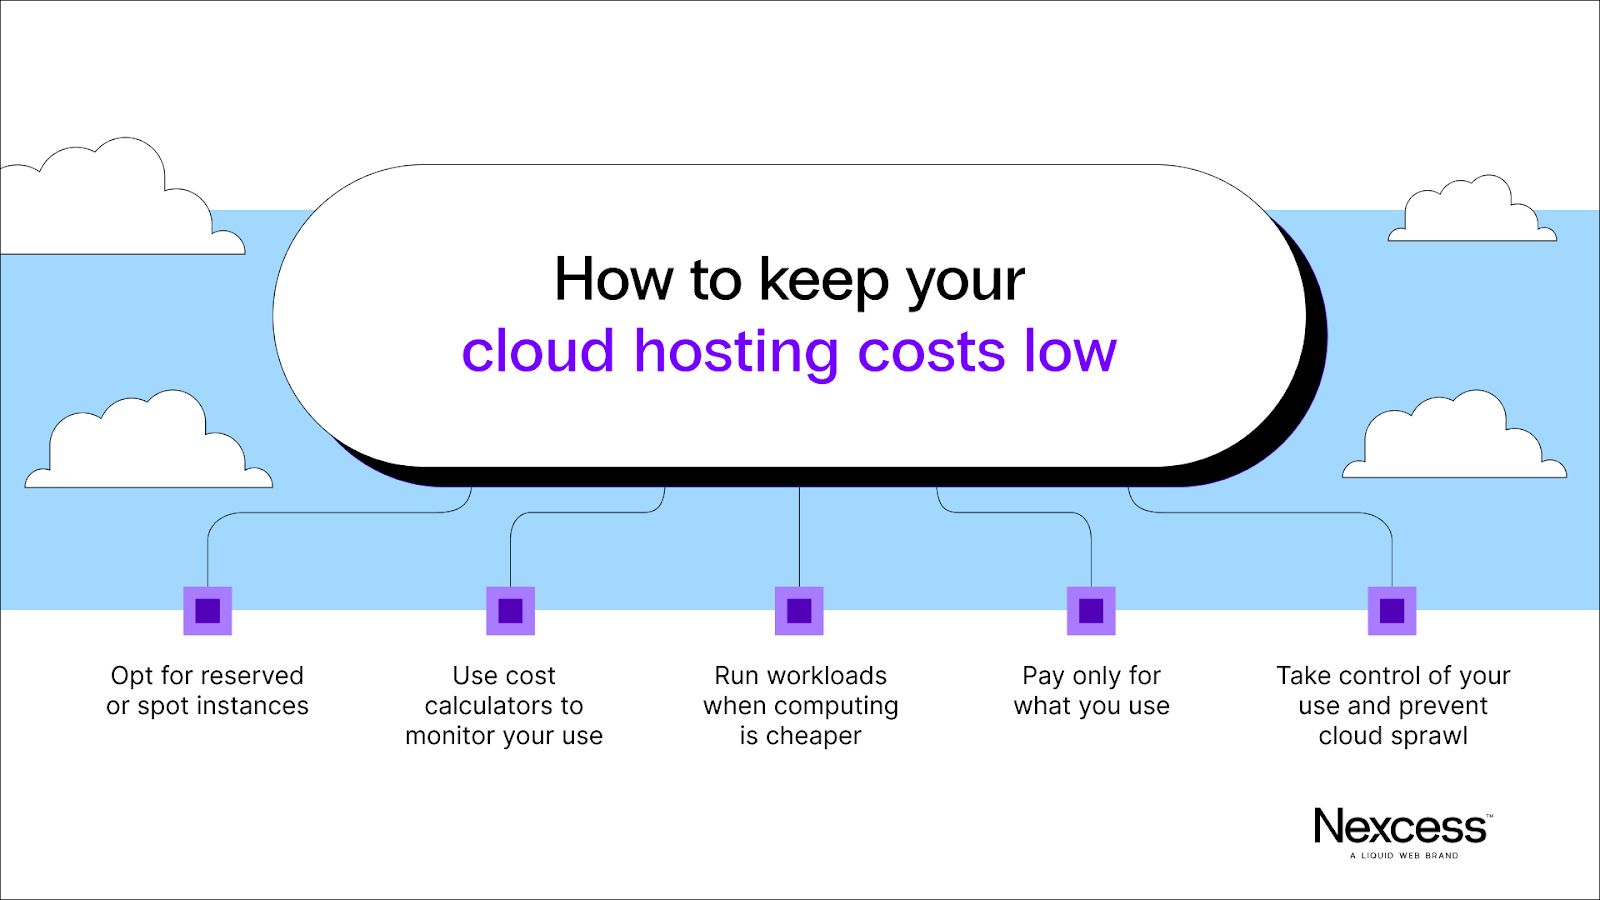 Strategies for keeping your cloud hosting costs low.